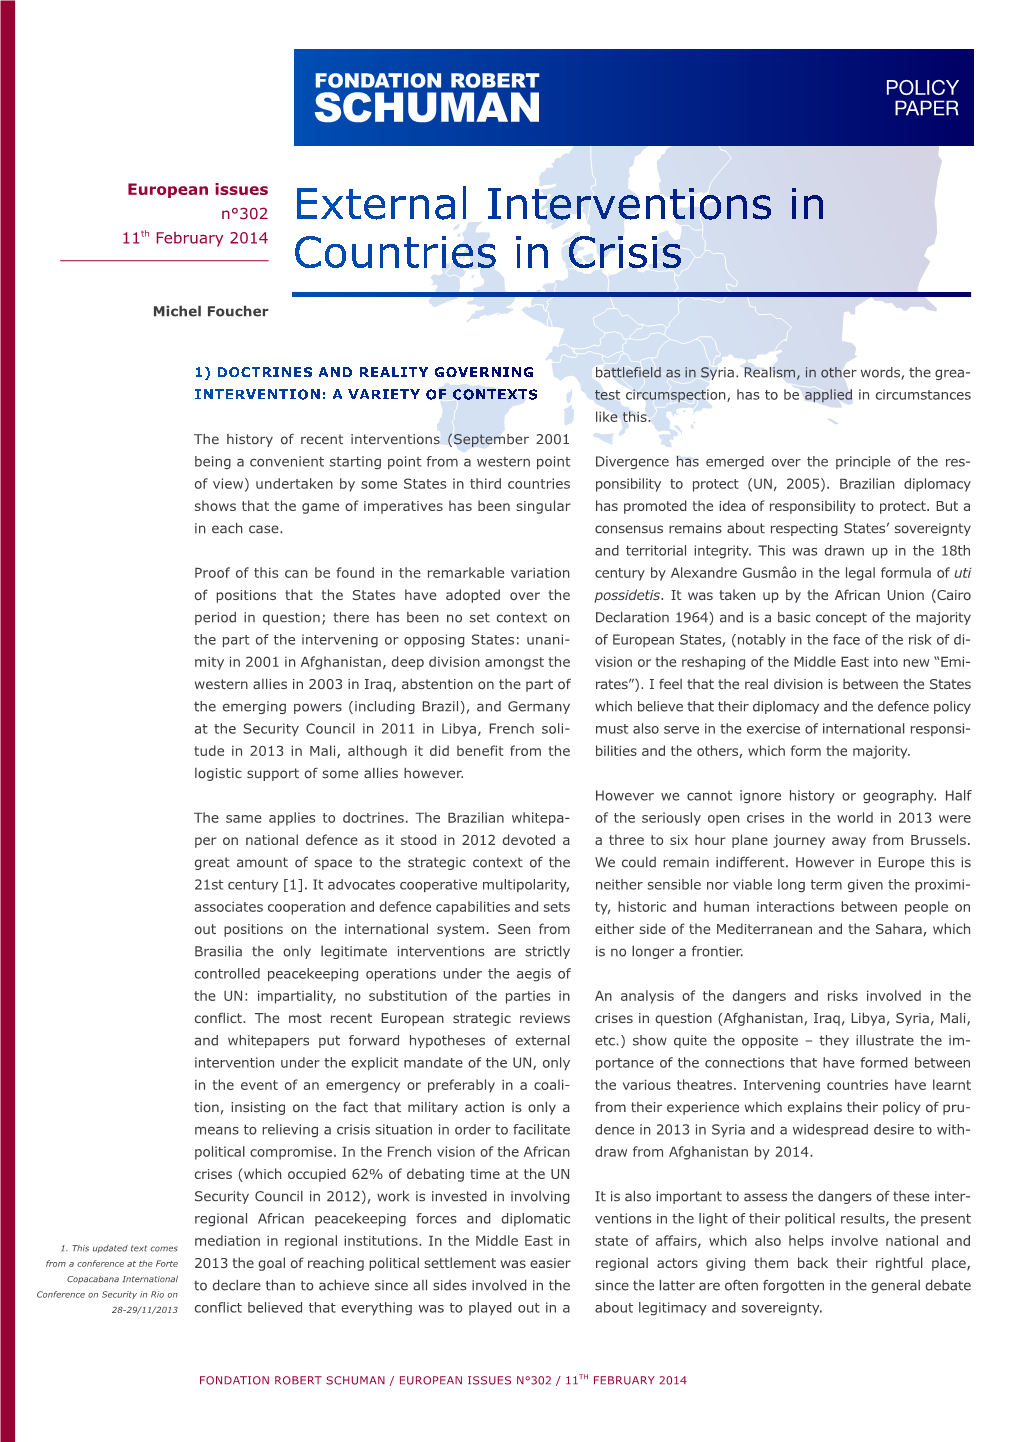 External Interventions in Countries in Crisis